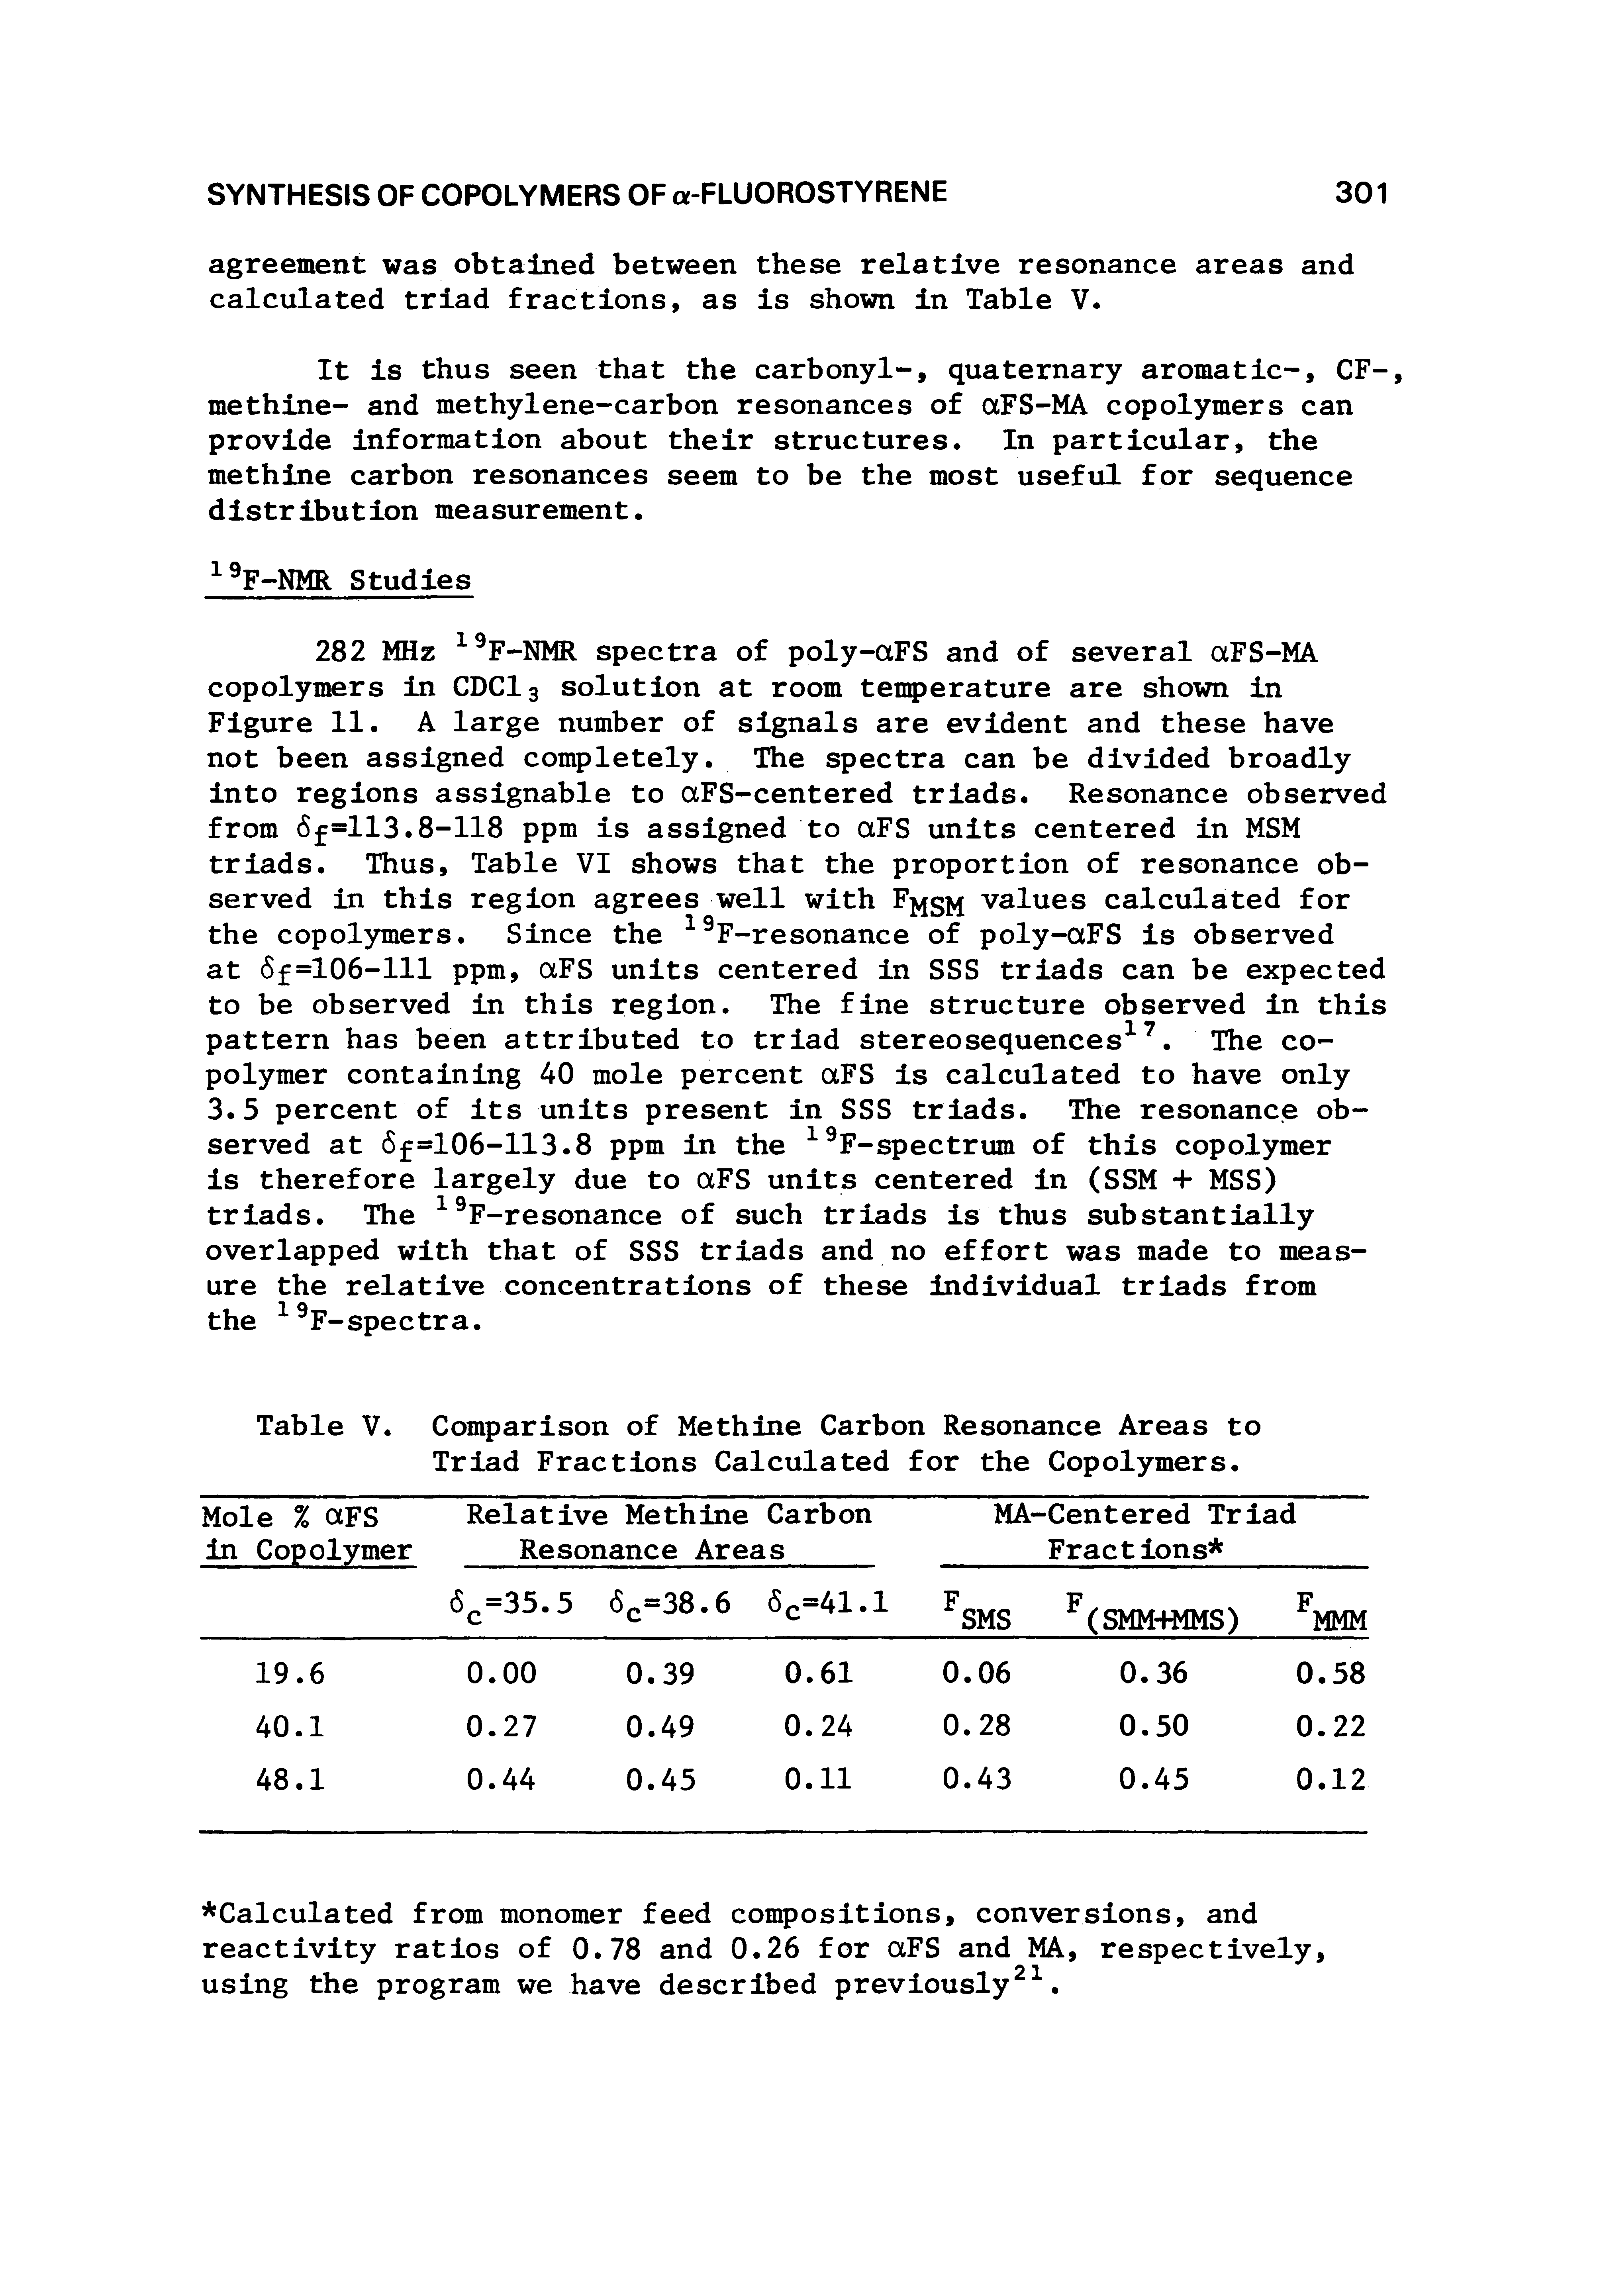 Table V. Comparison of Methine Carbon Resonance Areas to Triad Fractions Calculated for the Copolymers.